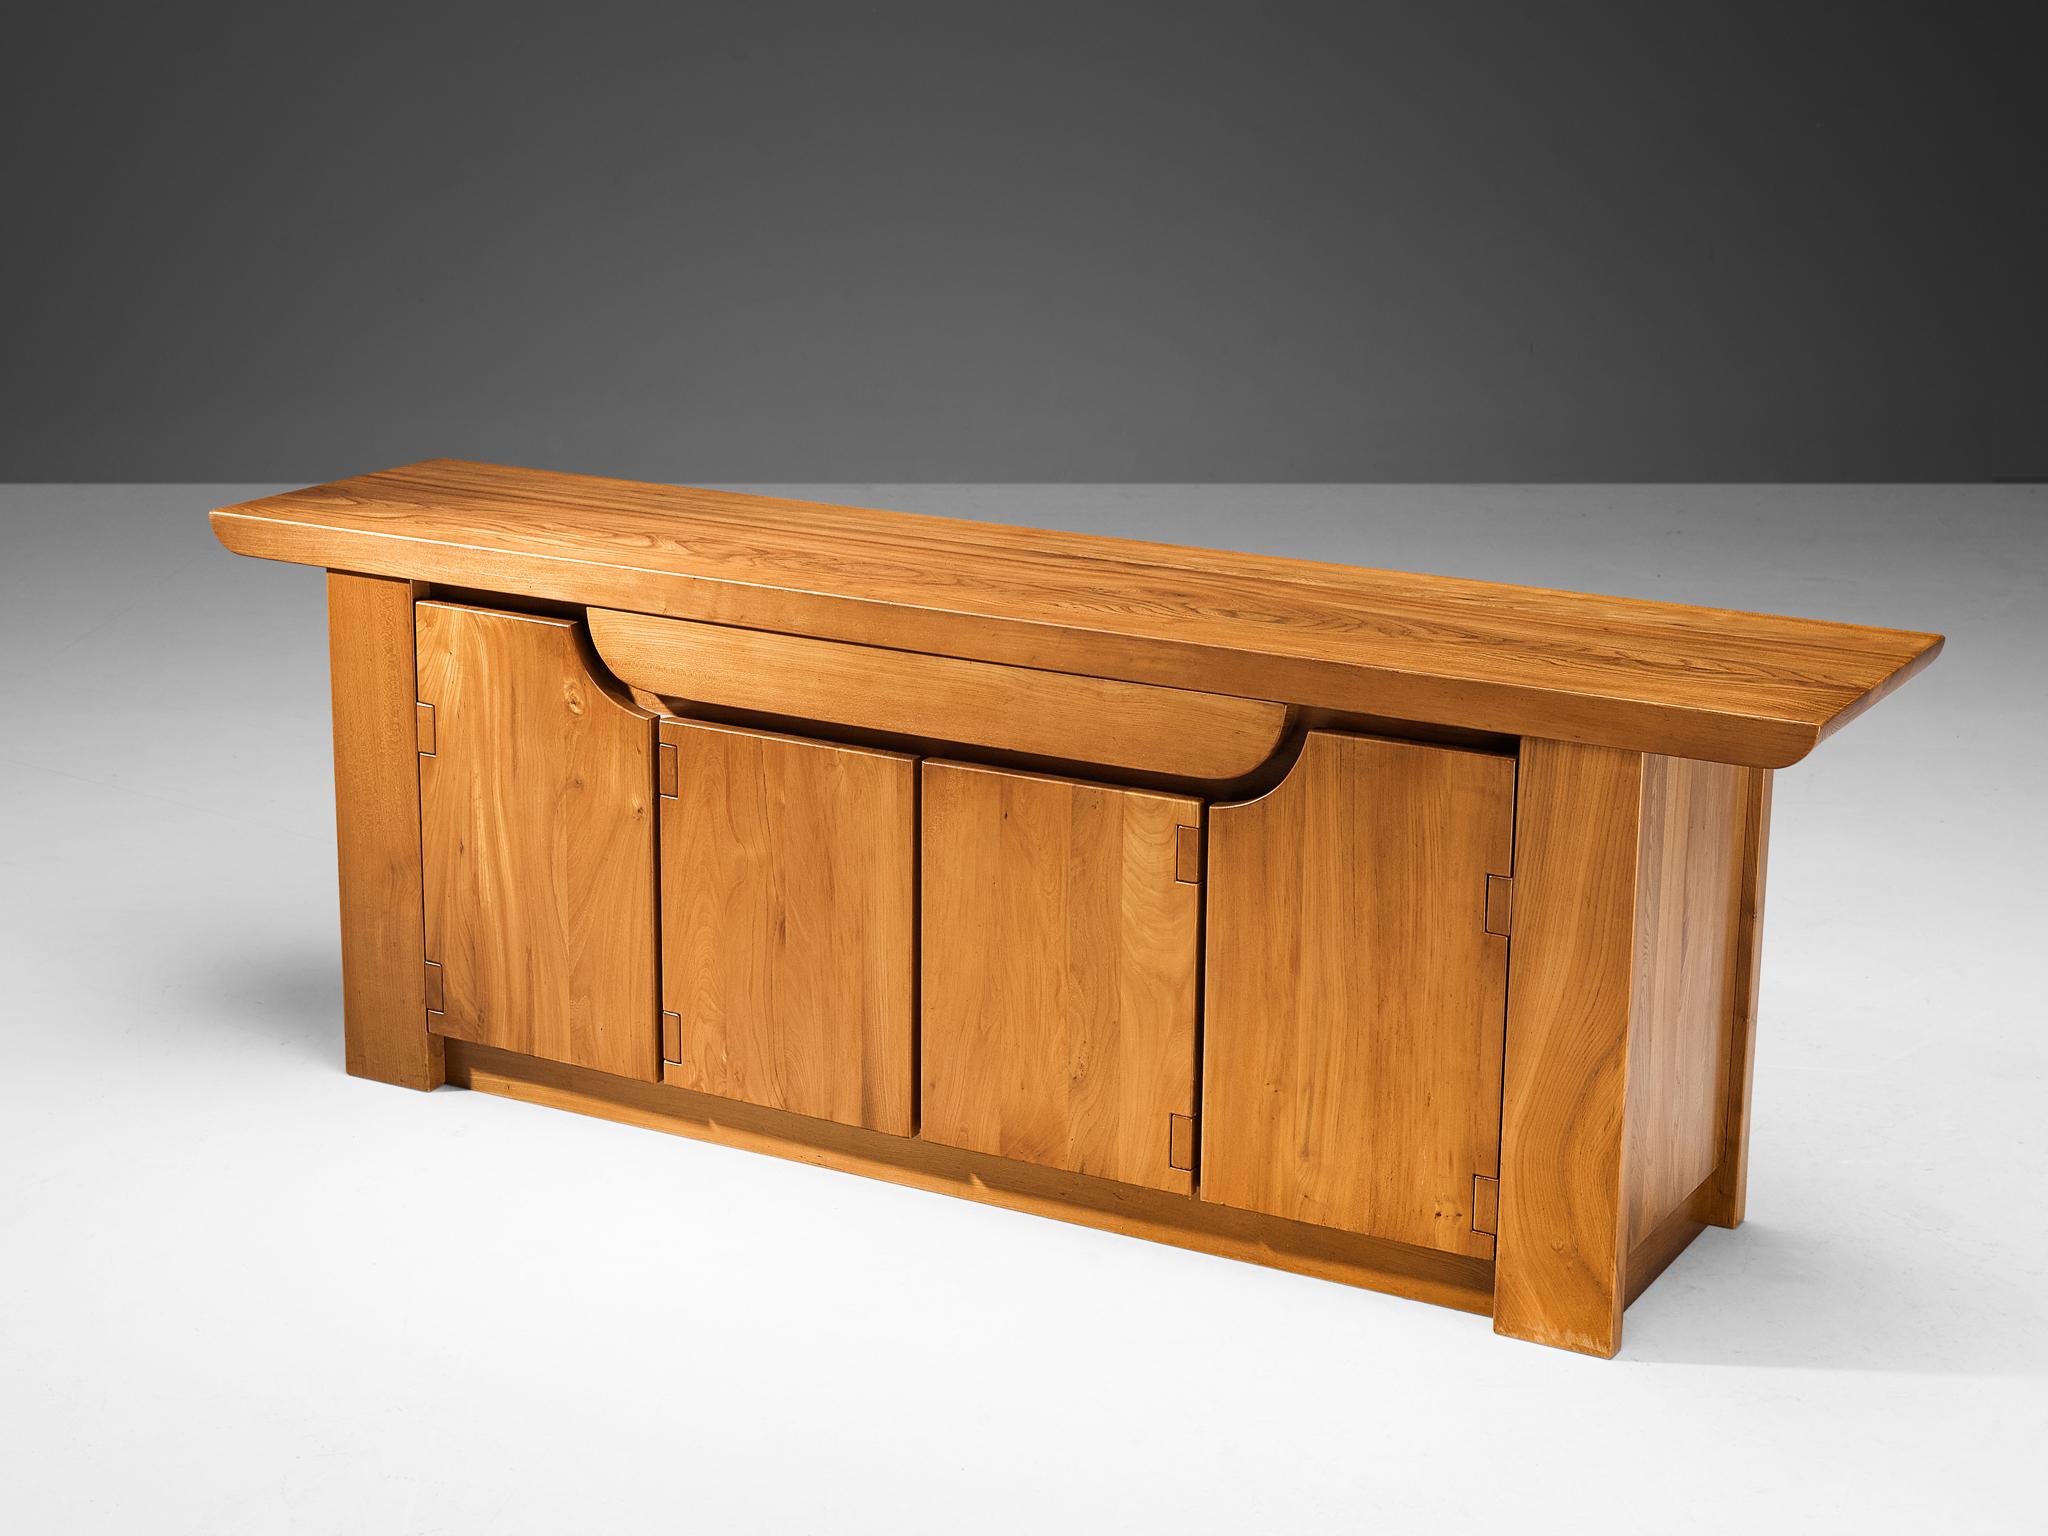 Luigi Gorgoni for Roche Bobois, sideboard, solid elm, France, 1980s

The Italian designer and architect Luigi Gorgoni designed furniture pieces for Roche Bobois since the mid 1970s. Gorgoni is known for its streamlined and clear designs, this piece